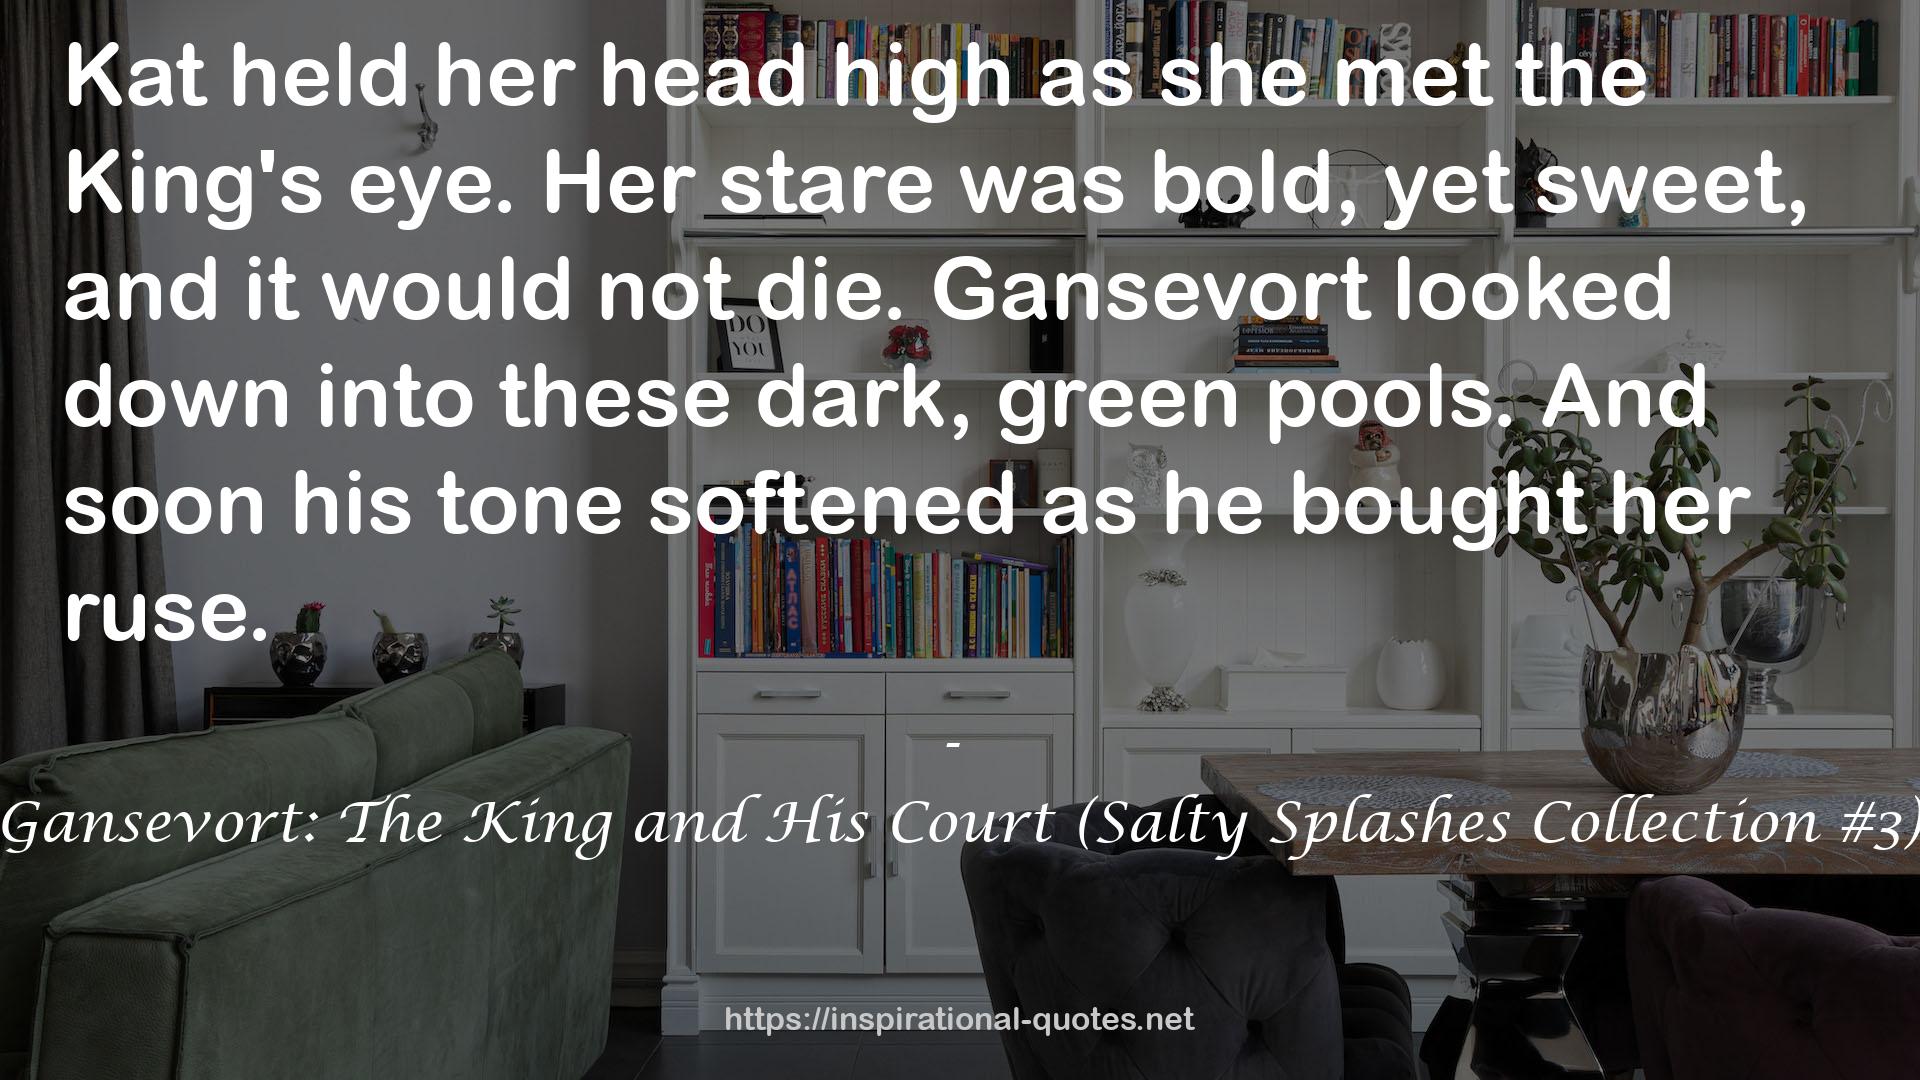 Gansevort: The King and His Court (Salty Splashes Collection #3) QUOTES